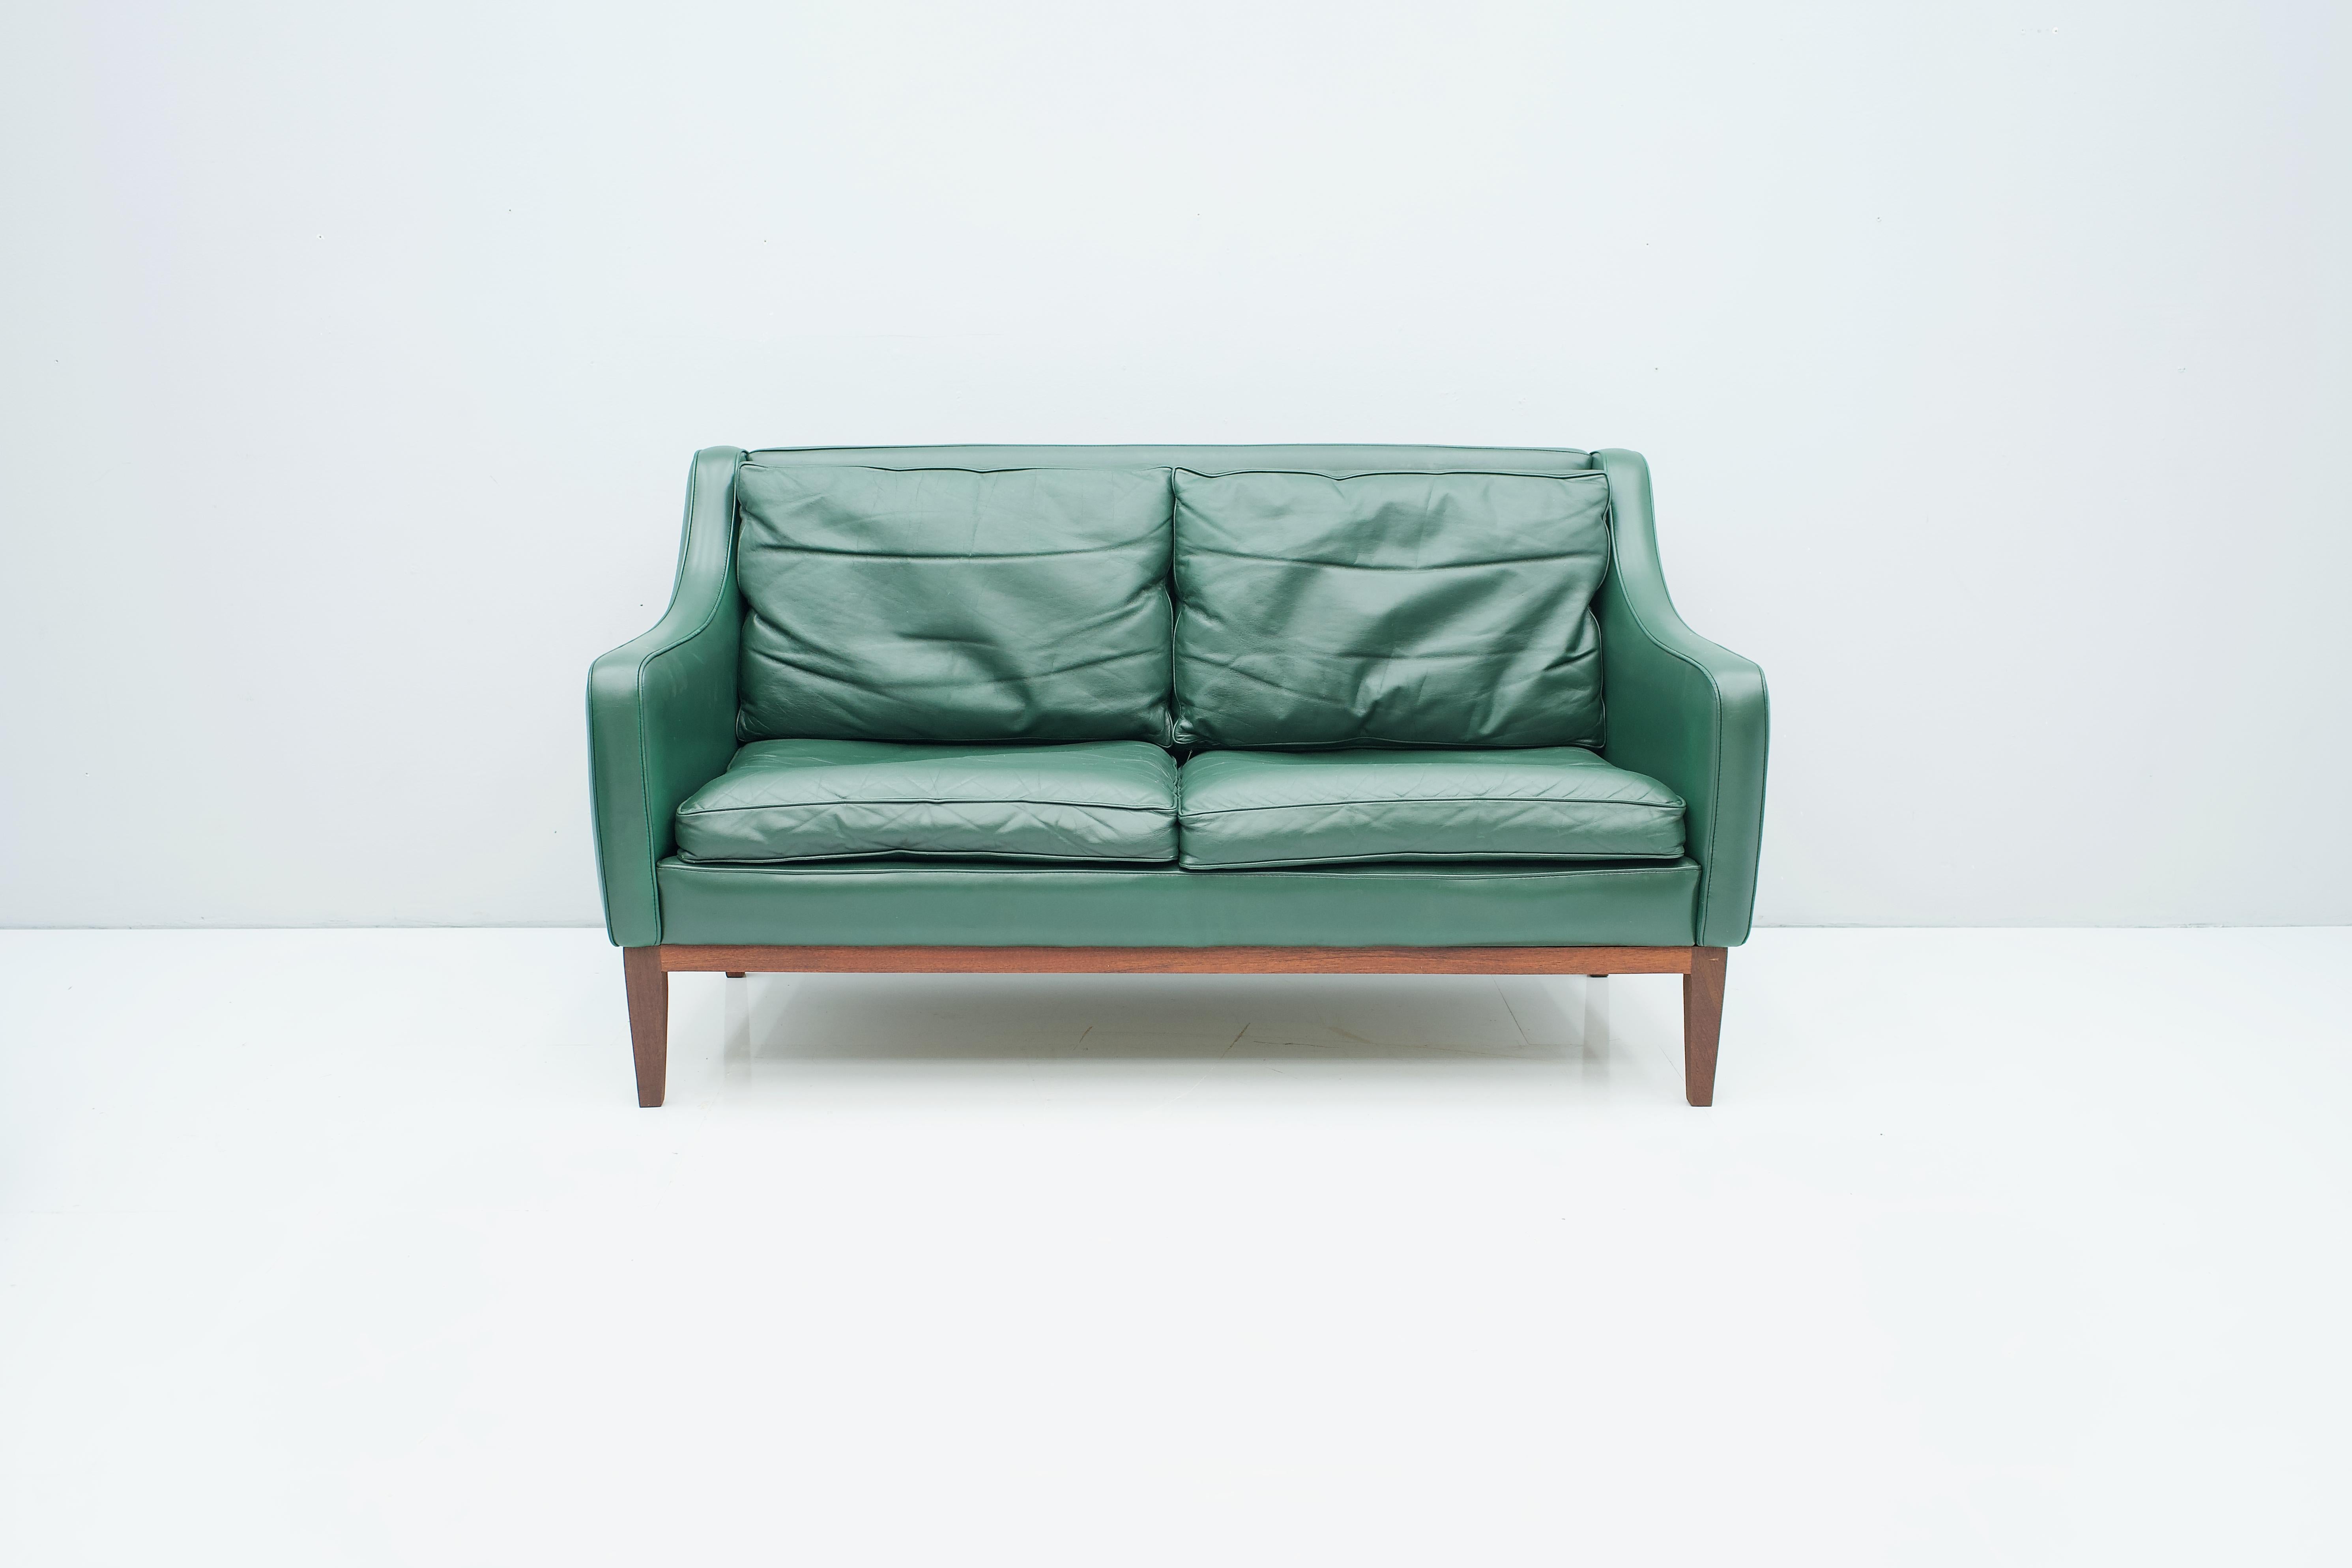 Mid-Century Modern Two-Seat Sofa in Green Leather, Italy, 1958 For Sale